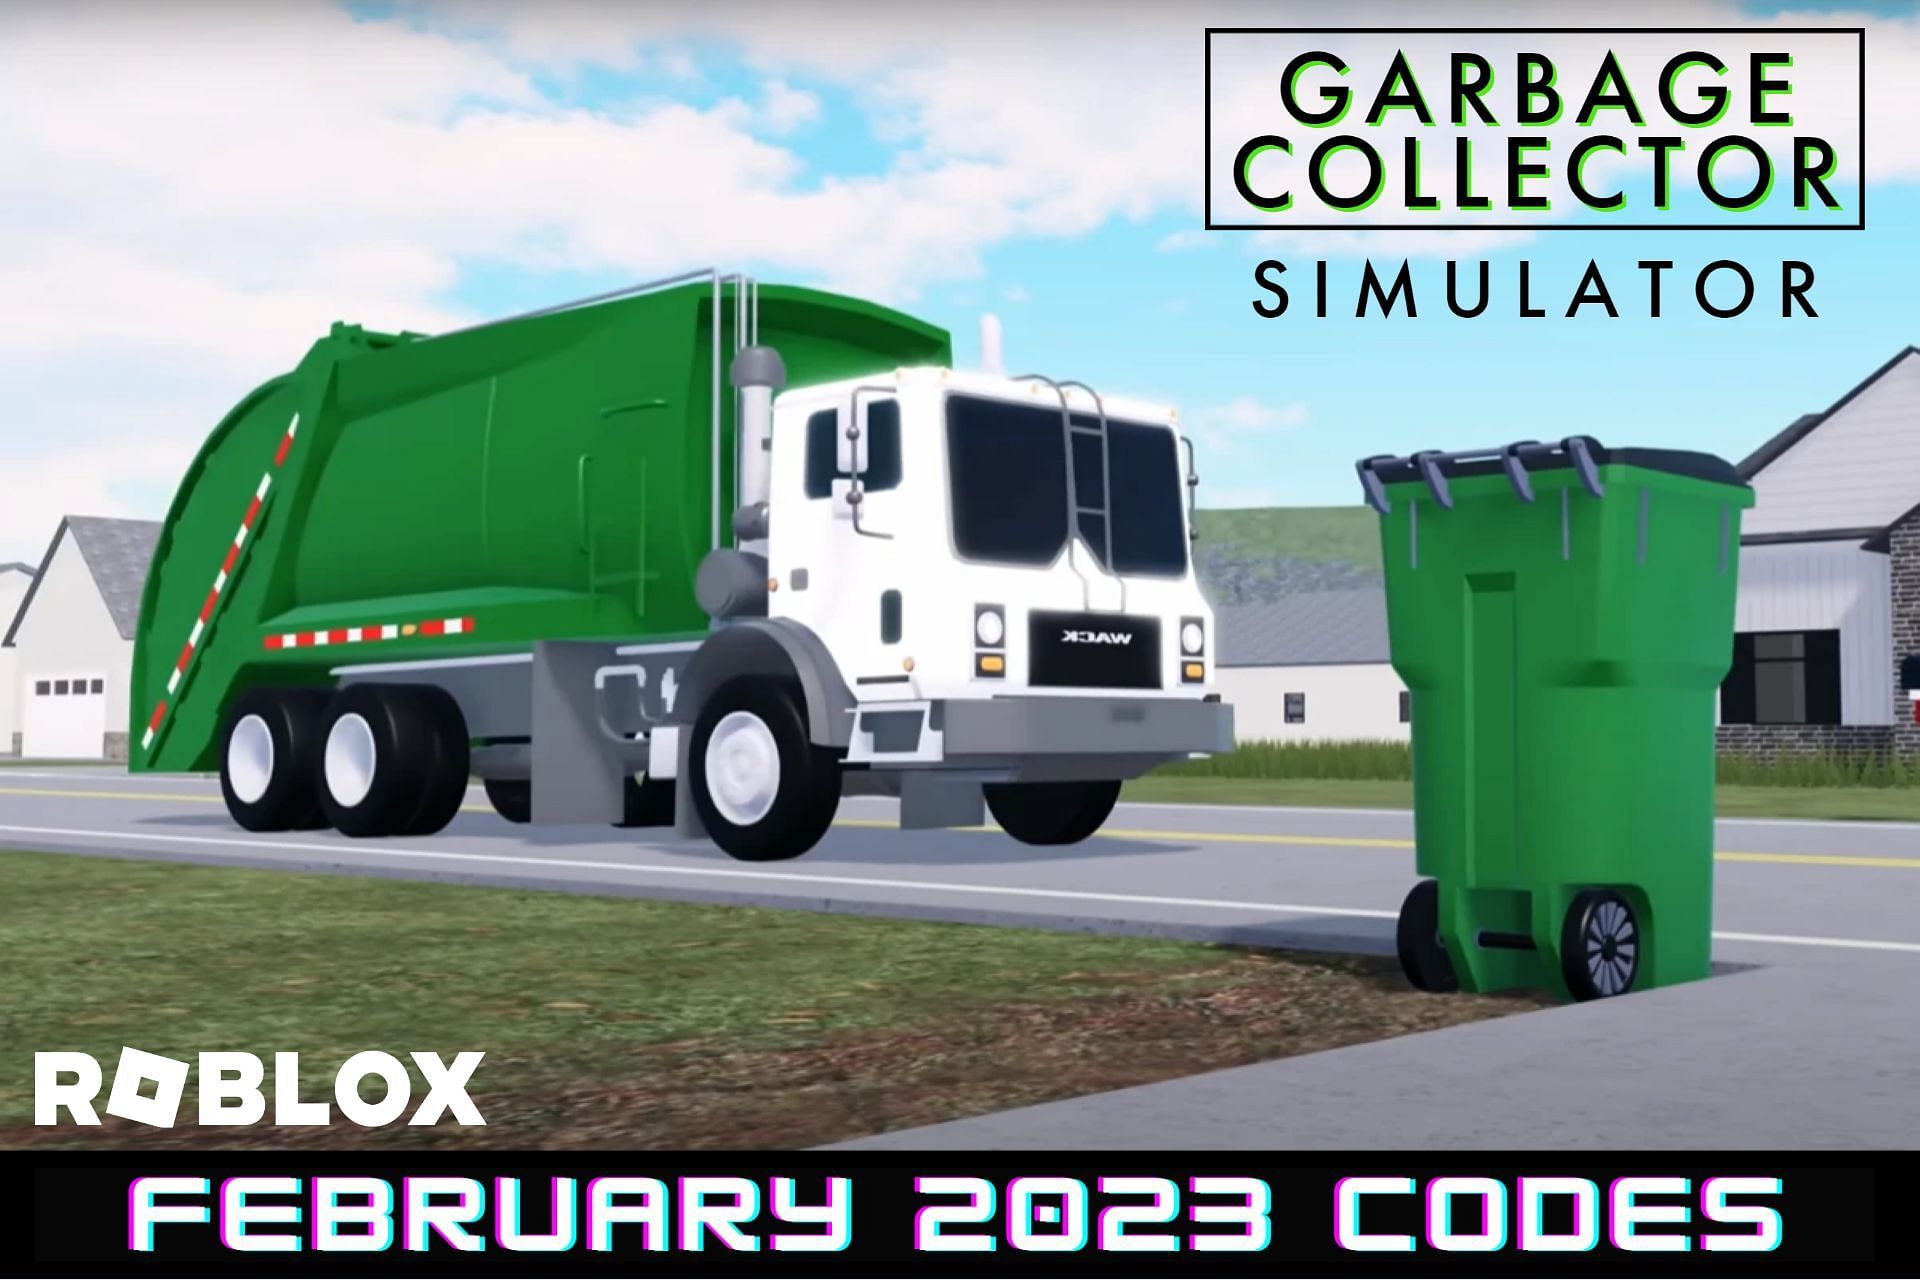 roblox-garbage-collector-simulator-codes-for-february-2023-free-pets-boosts-and-more